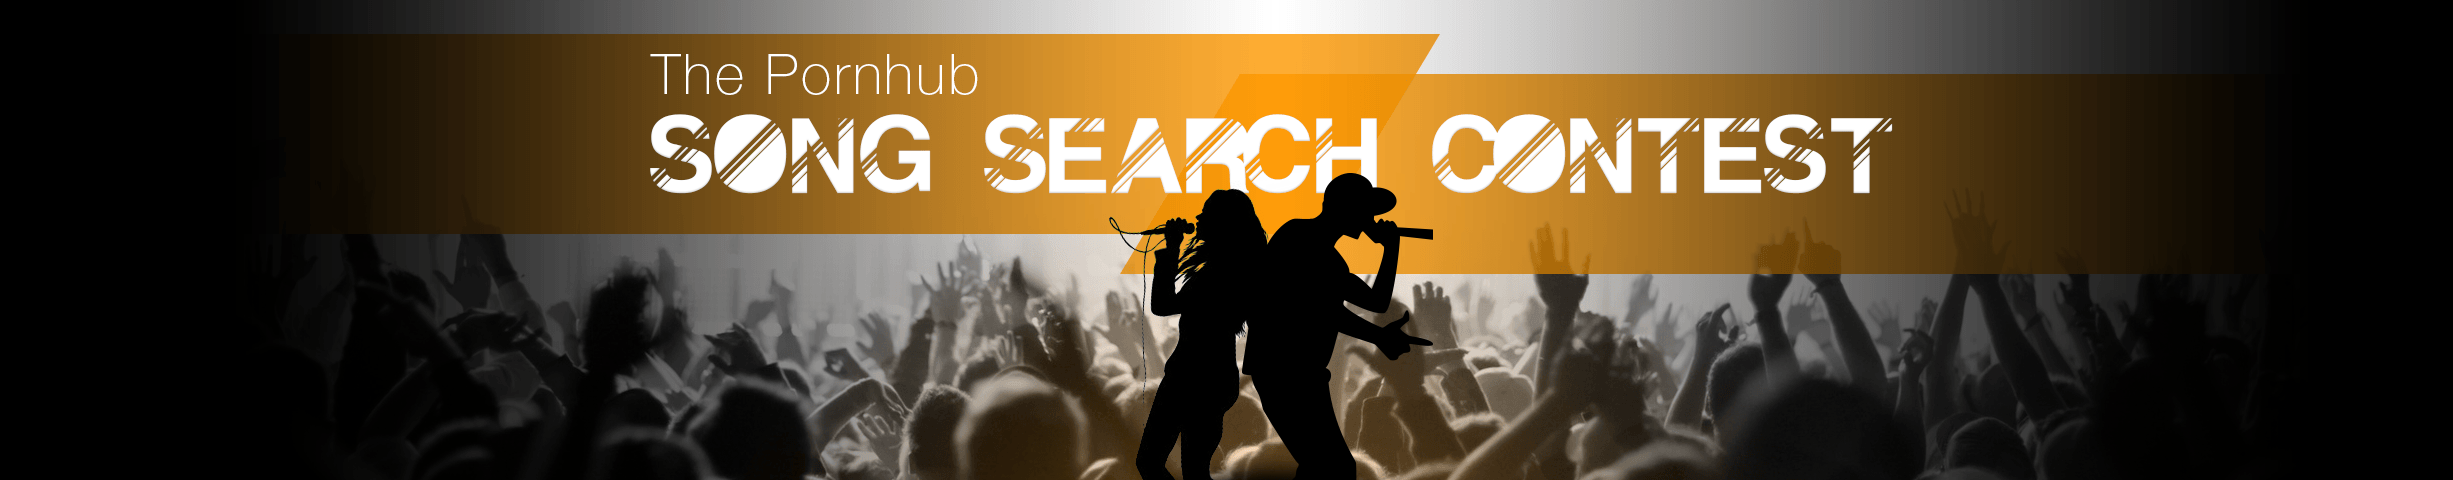 The Pornhub Song Search Contest